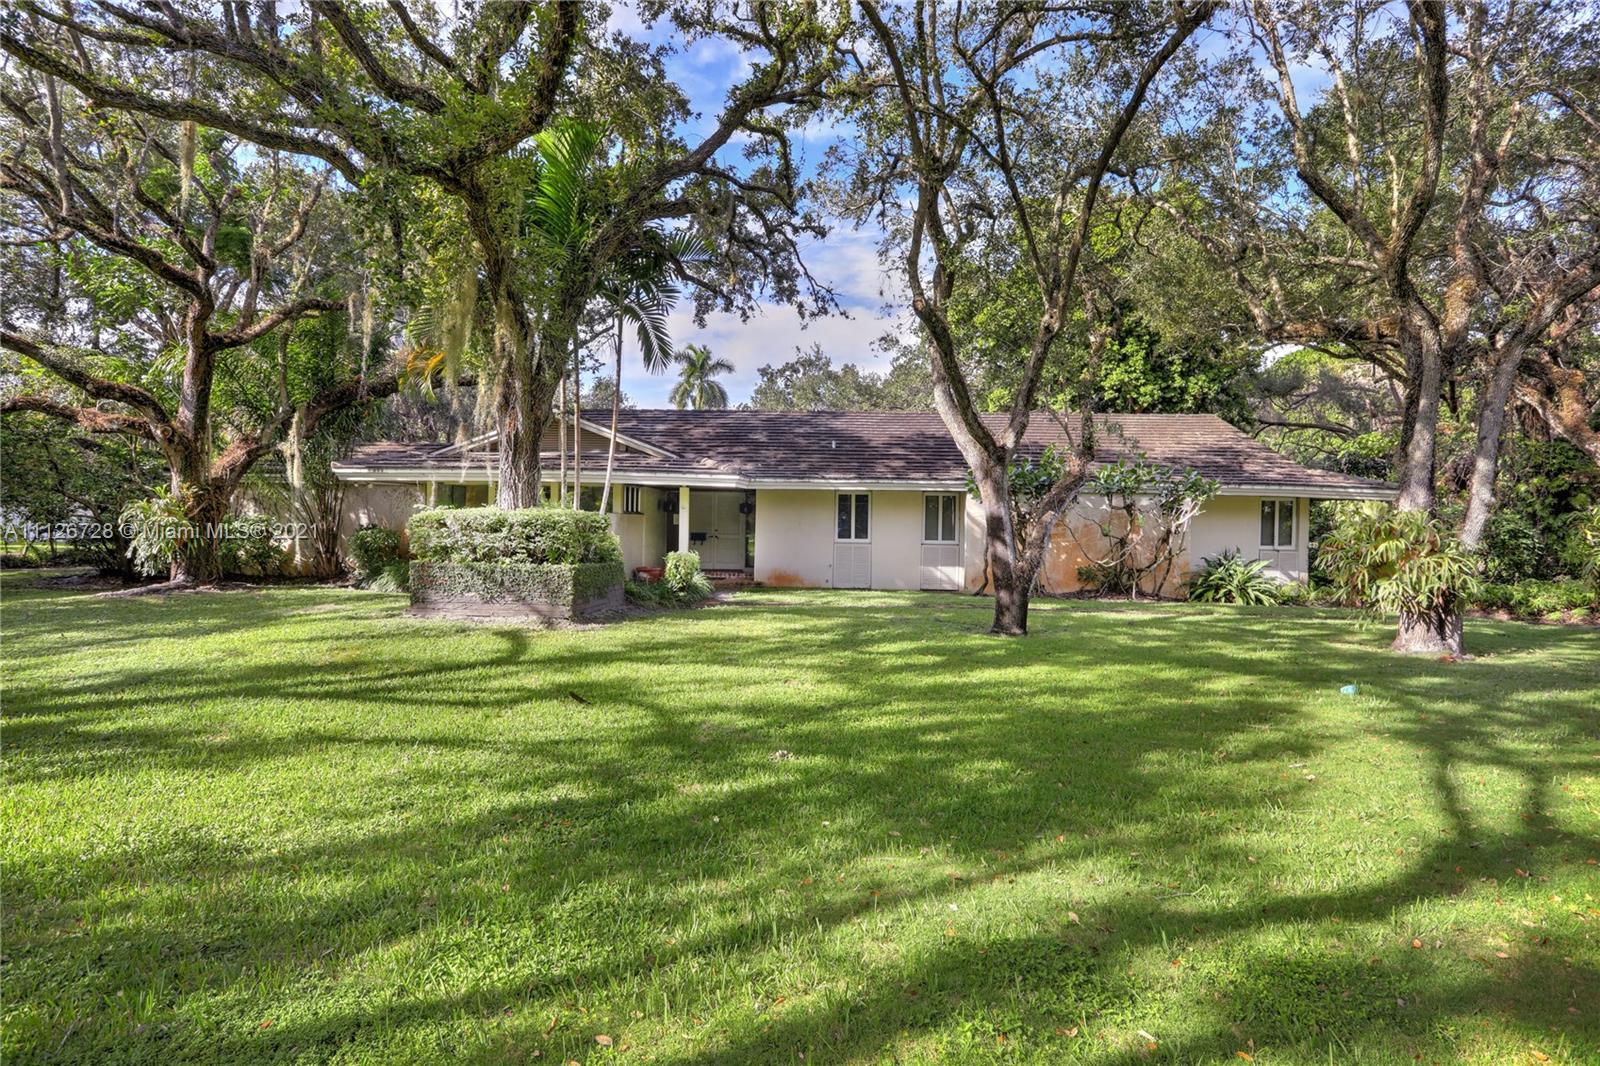 Situated among beautiful, gigantic oak trees, this stunning 51,000+ sf lot presents a golden opportunity for someone to either restore, renovate or rebuild the existing 4 bedroom, 4 bath home and pool house, complete with a full bathroom, or raze the existing house and build new.  Ideally convenient to a collection of Dade County’s best schools and amenities, there could be no better opportunity! Snapper Creek Lakes not only boasts some of our county’s most beautifully presented large residences, it also offers a private marina for its residents’ use. Association membership is a prerequisite to purchase.